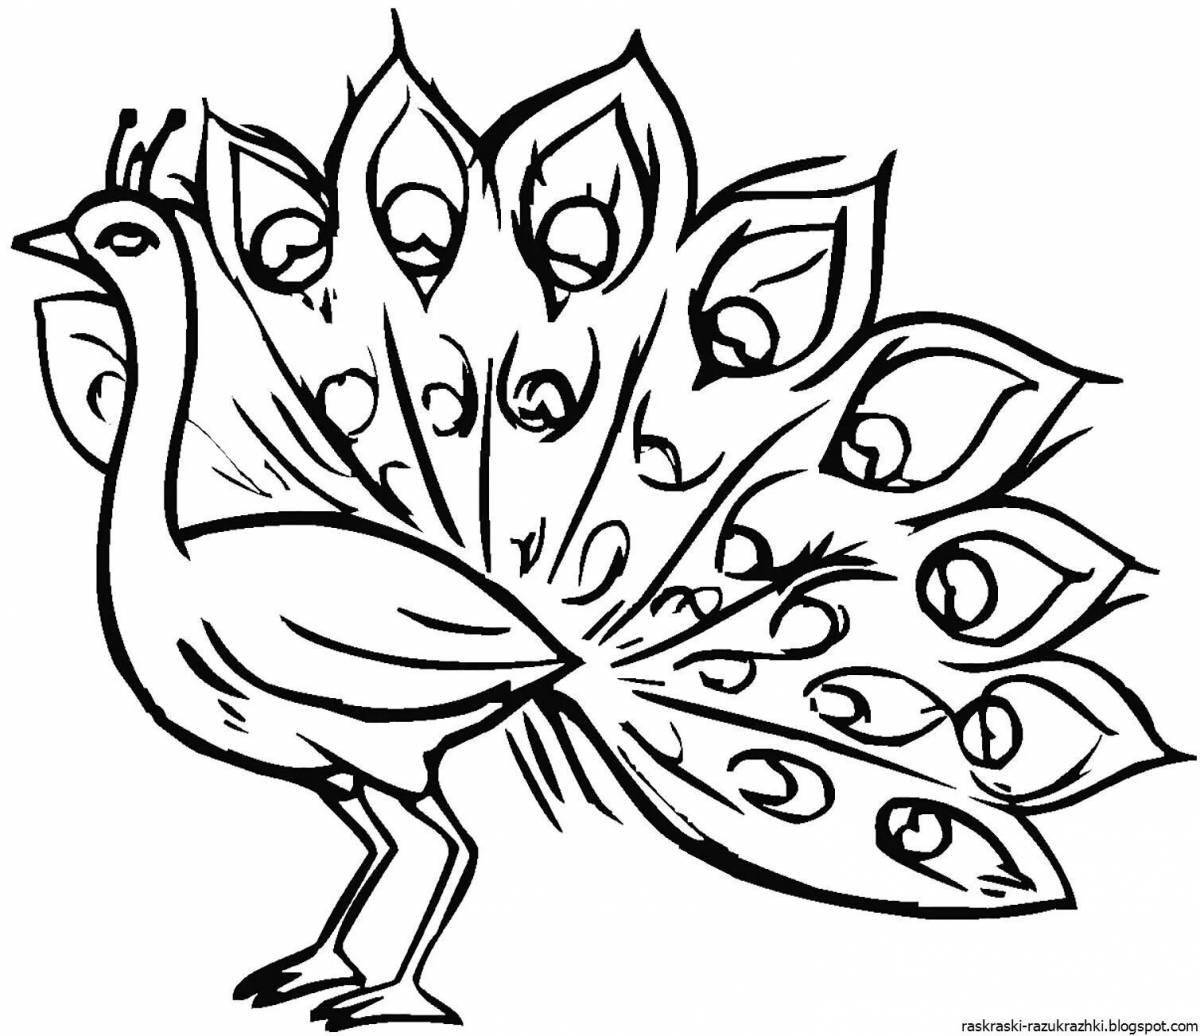 Shiny fire bird coloring pages for kids